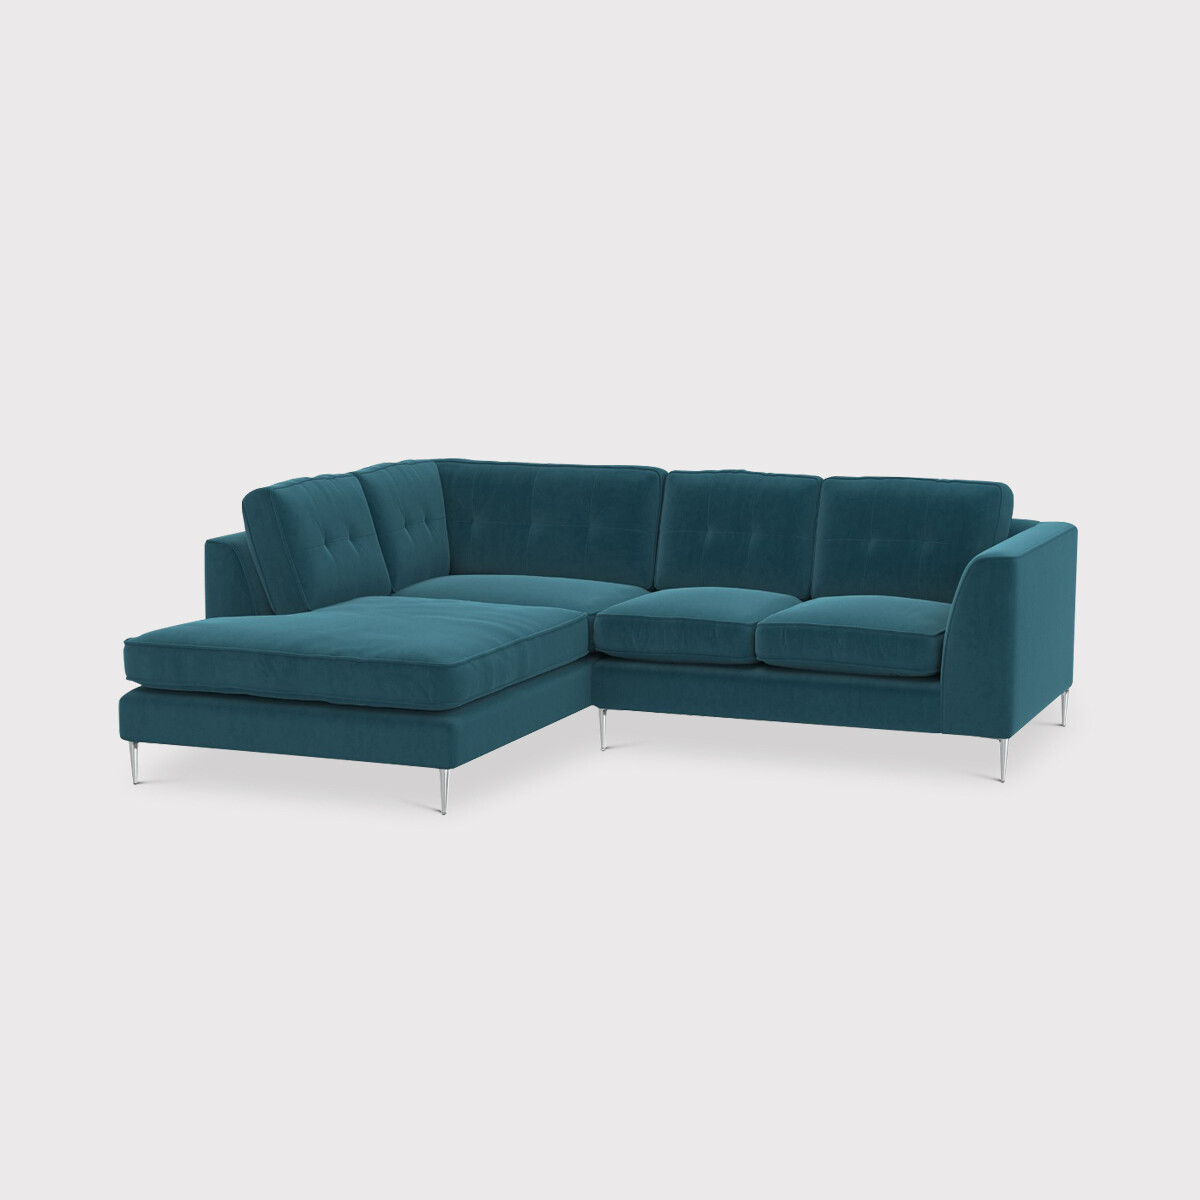 Conza Small Corner Group Right, Teal Fabric | Barker & Stonehouse